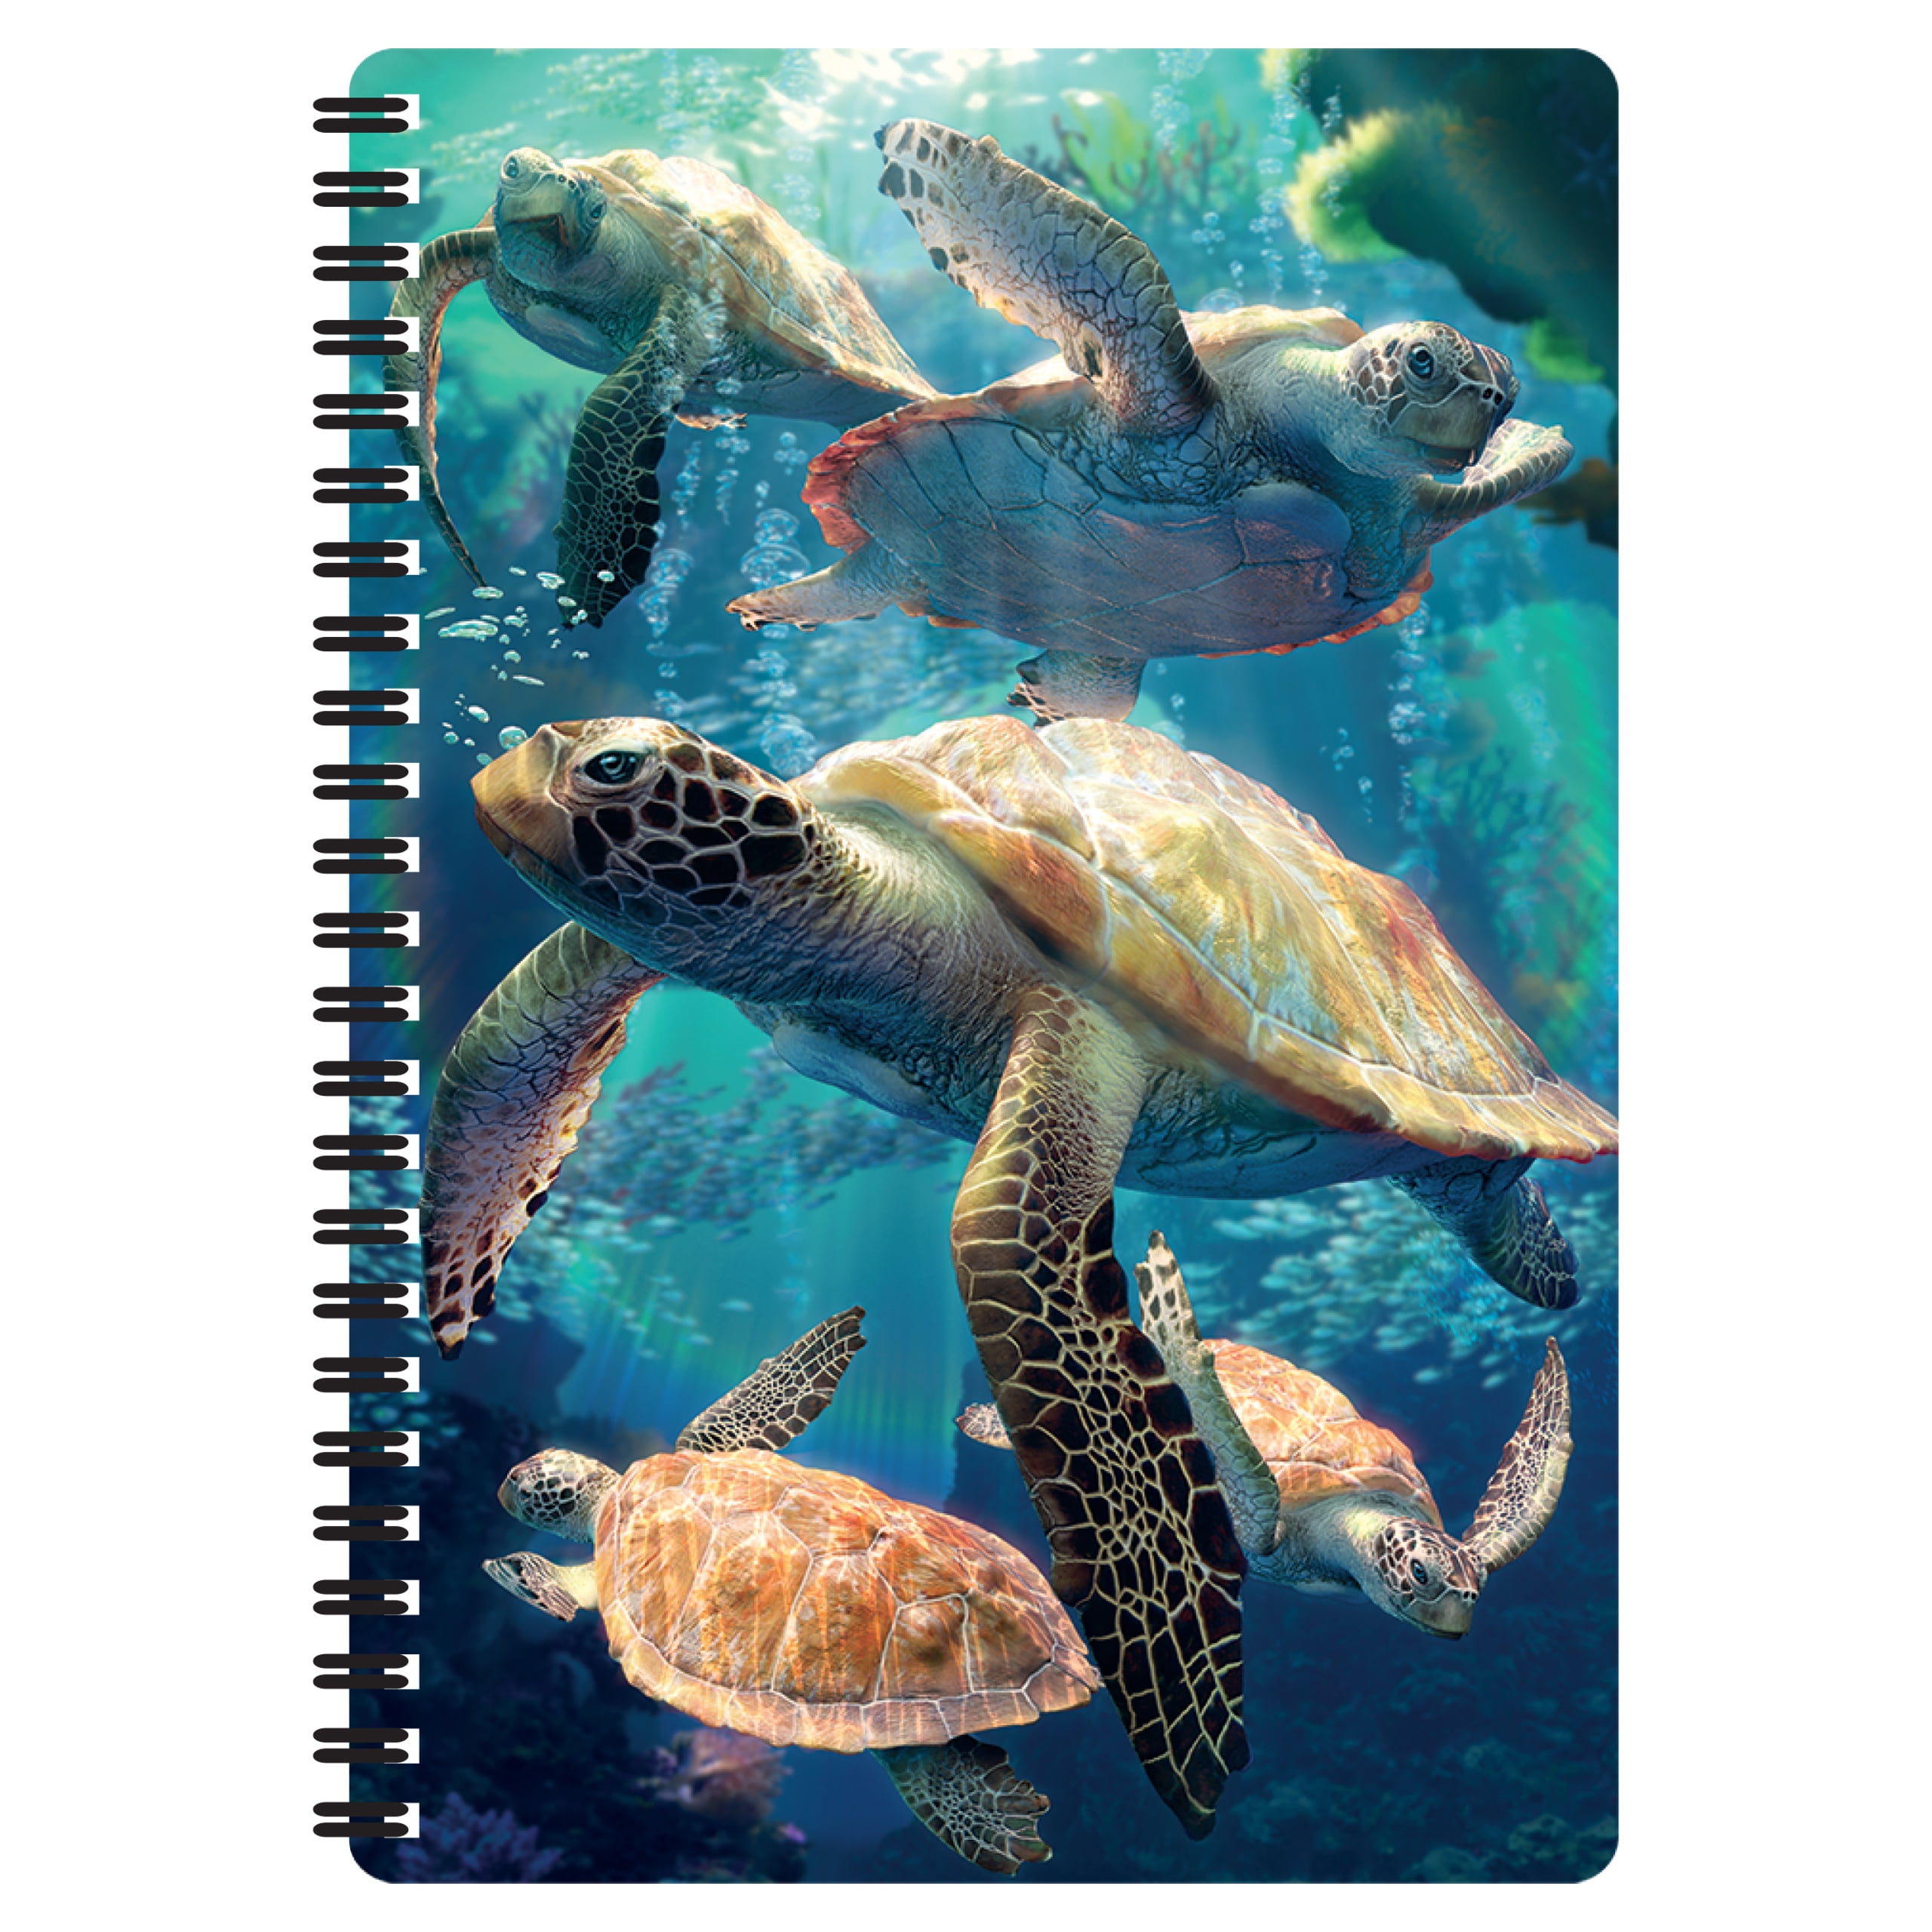 3D LiveLife Notebook - Sea Turtle Swim from Deluxebase. 80 Page Lined ...